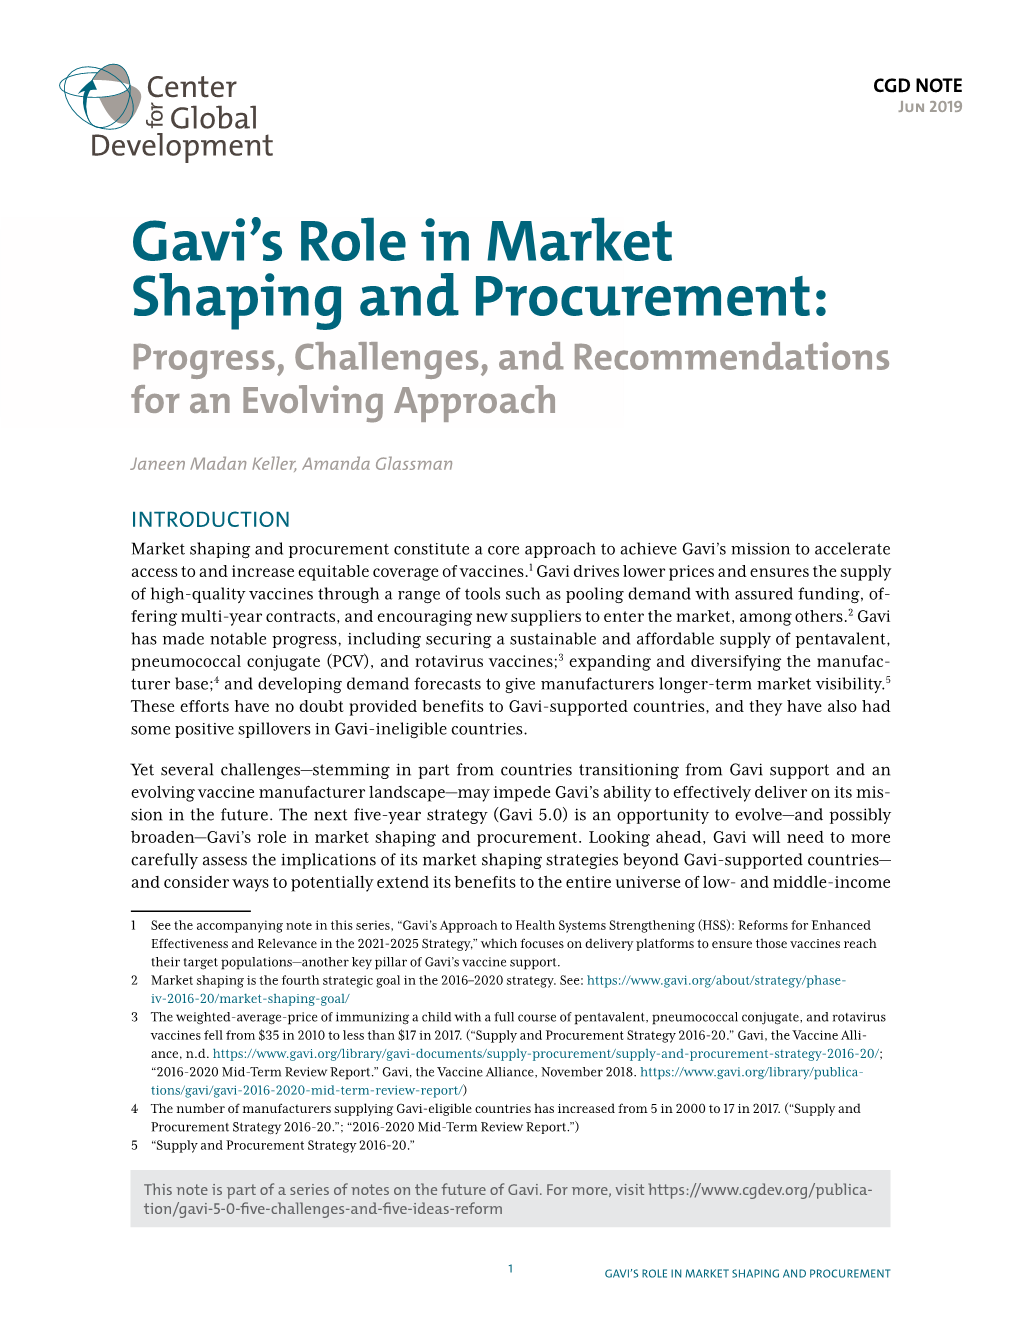 Gavi's Role in Market Shaping and Procurement